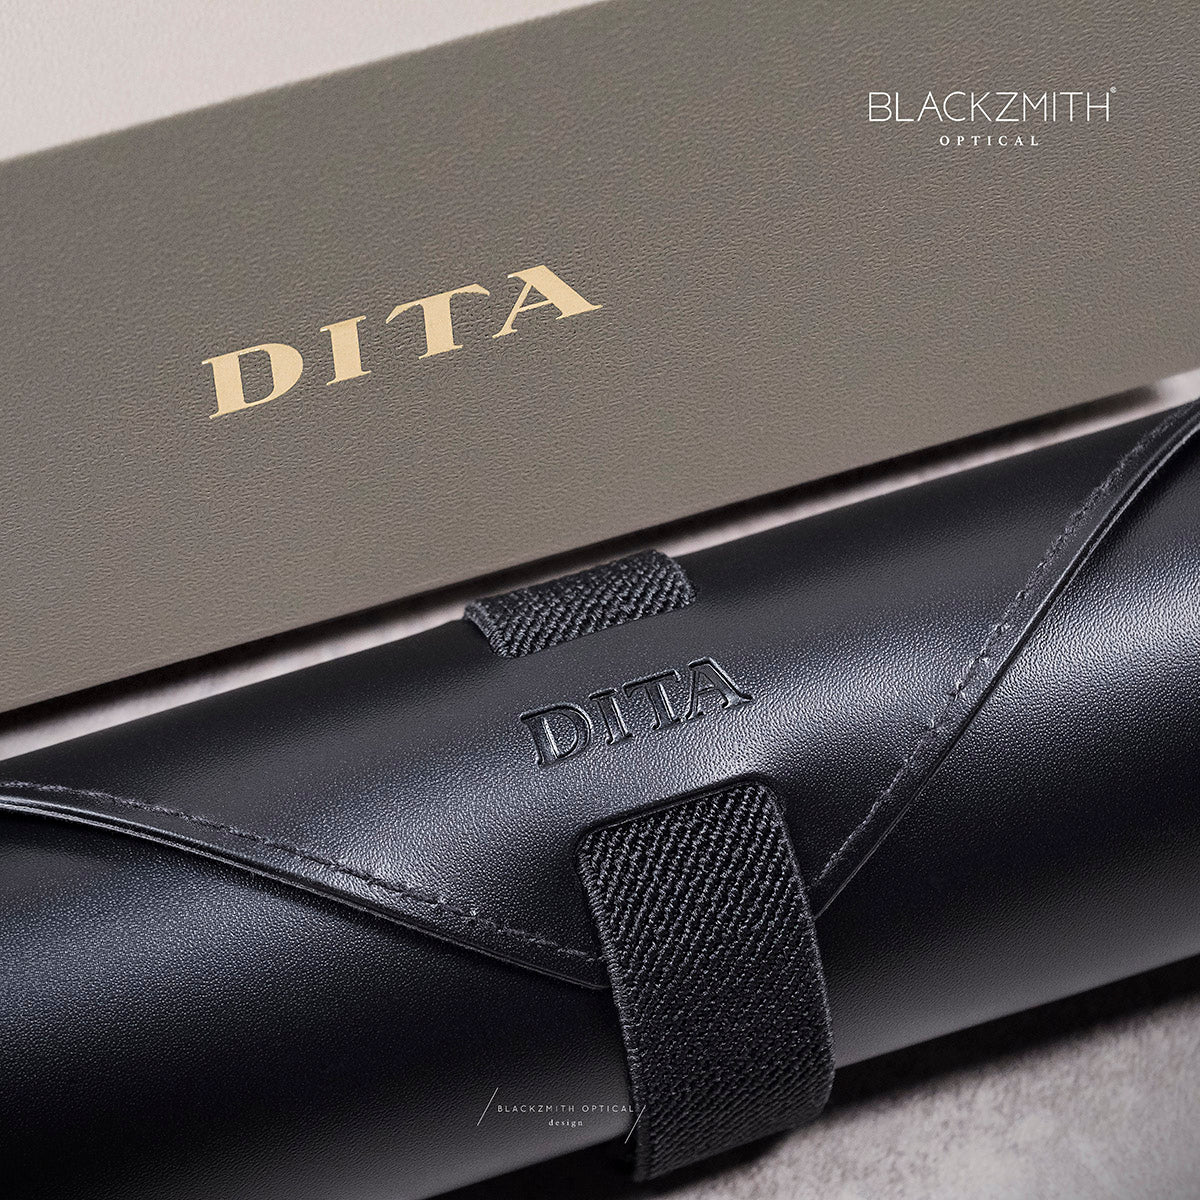 Dita - Iambic DTX143-03(52)【Pre-order Now】